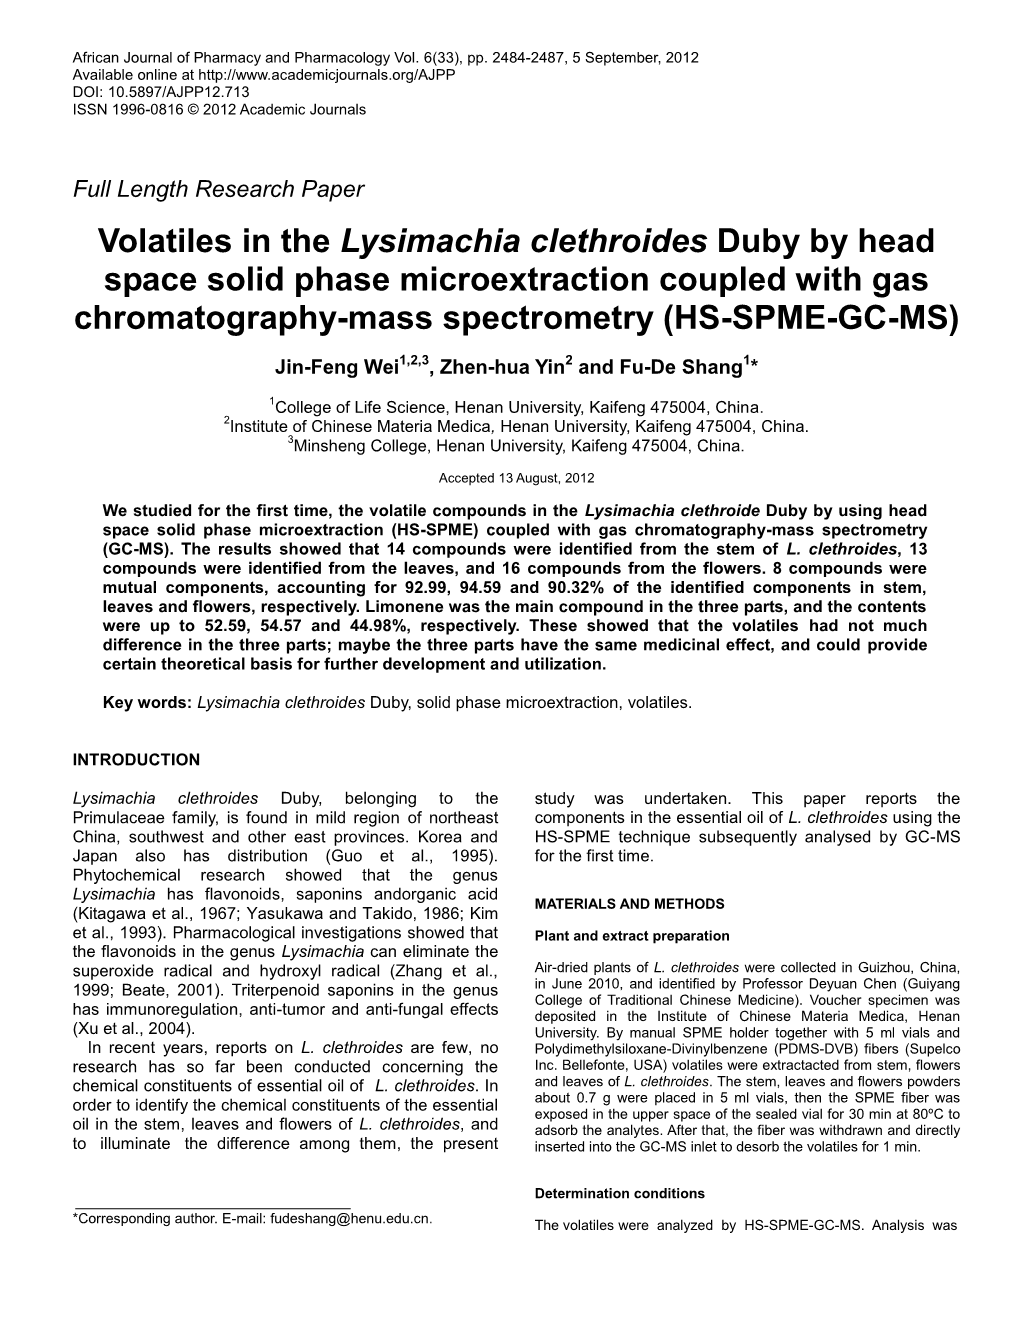 Volatiles in the Lysimachia Clethroides Duby by Head Space Solid Phase Microextraction Coupled with Gas Chromatography-Mass Spectrometry (HS-SPME-GC-MS)